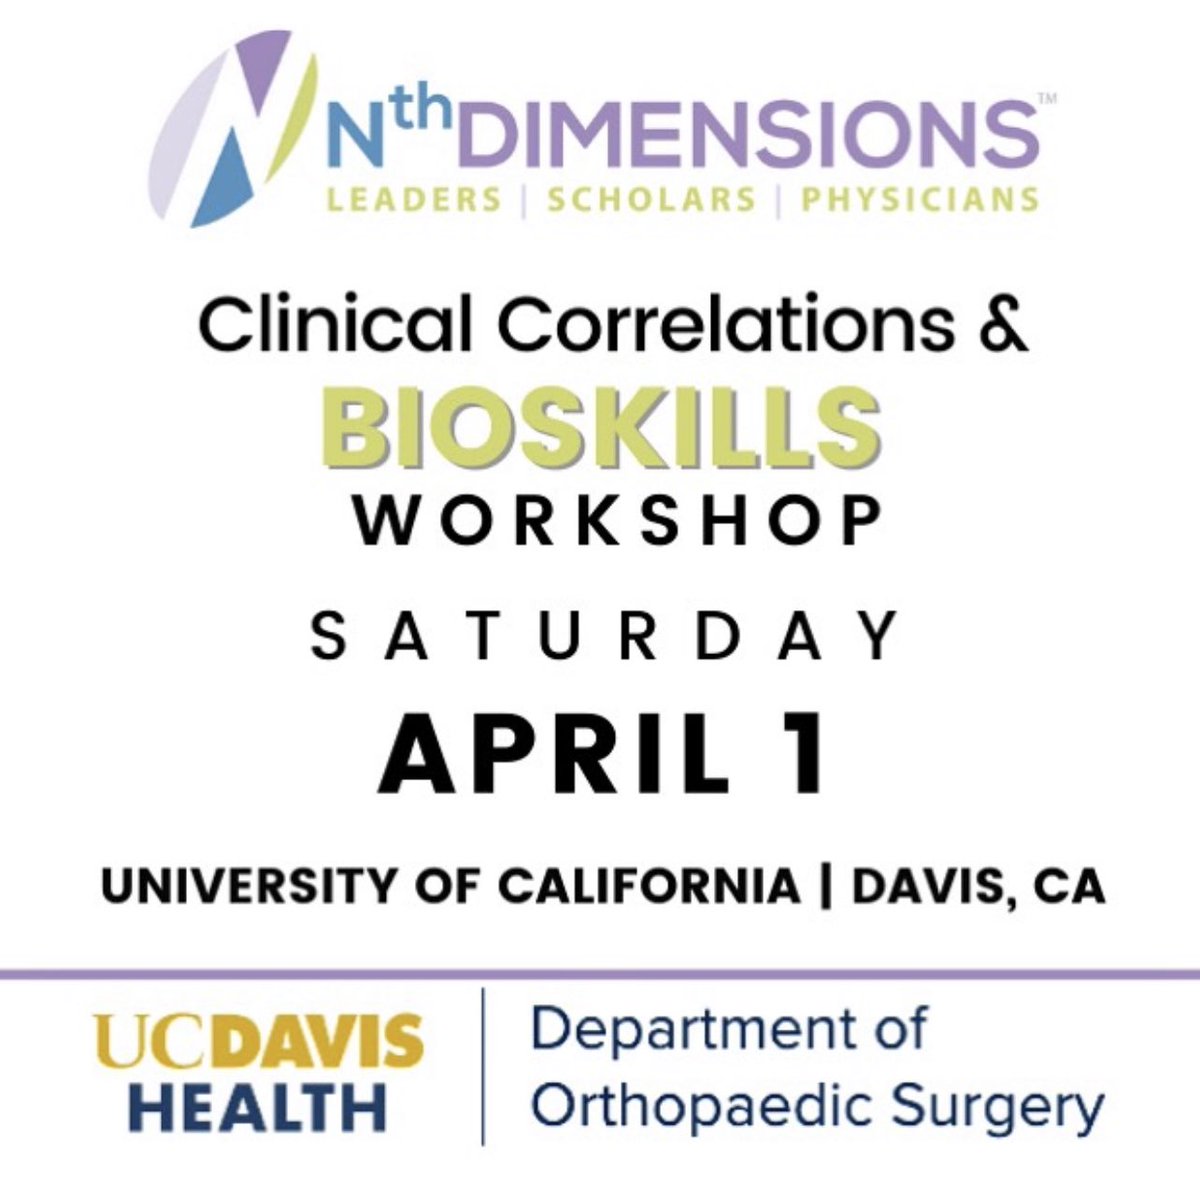 Are you joining us this weekend at our UC Davis Bioskills event on April 1st? Registration is still open! Come and learn about Nth Dimensions & Orthopaedics! Head to our website using the link in our bio to register! This event is open to ALL MEDICAL STUDENTS IN THE REGION!